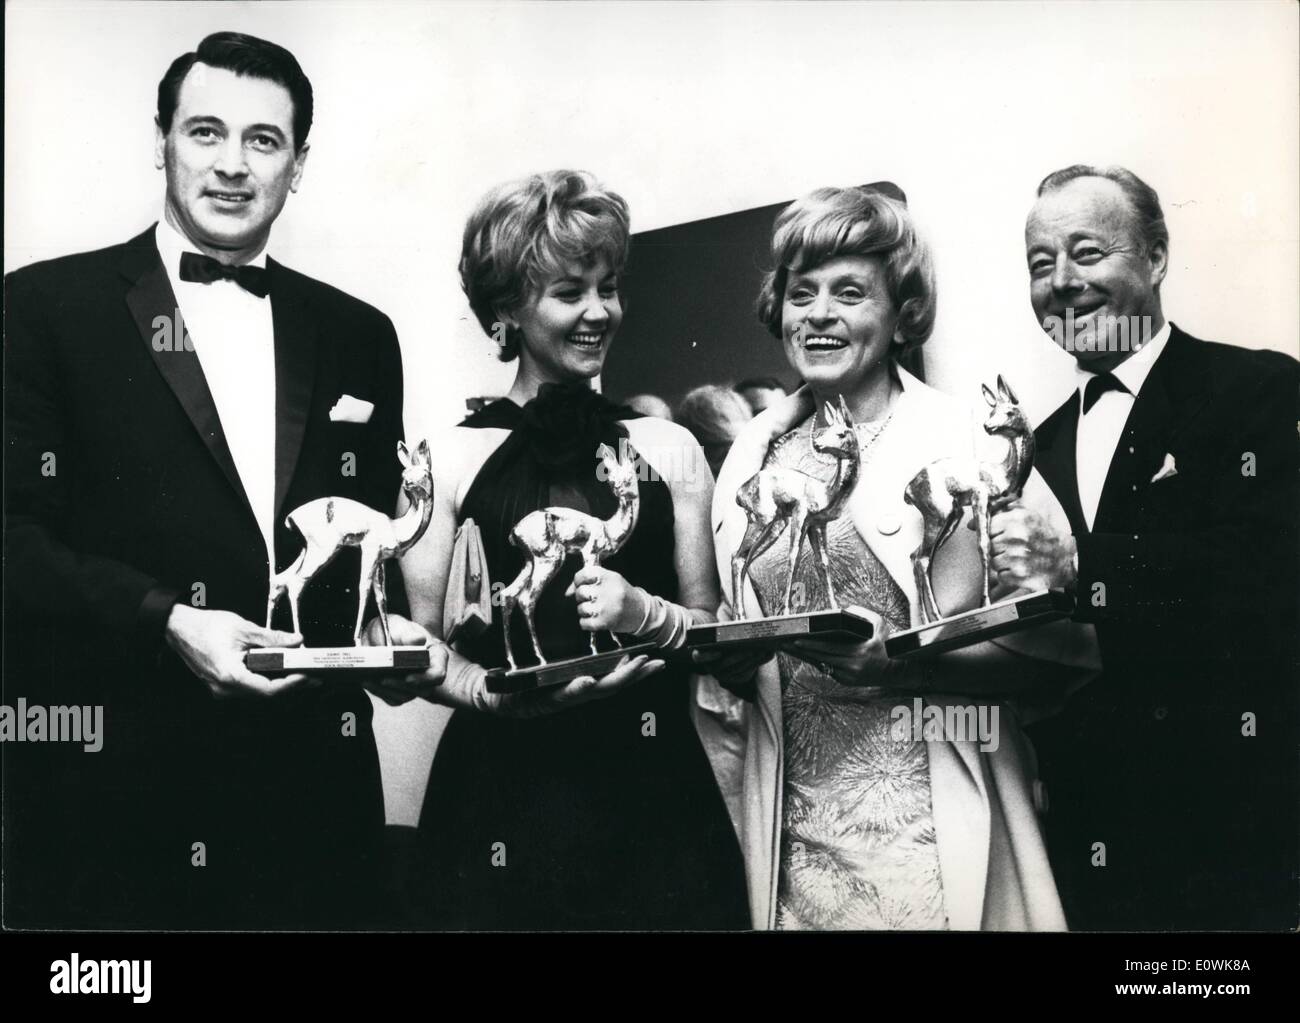 Apr. 04, 1963 - Bambi-film prizes awarded in Karlsruhe: The traditional german film prizes Bambi were presented to the winners of this years poll today in the Schwarz - waldhalle at Karlsruhe, Germany today. The winners of this year are (from left) Rock Hudson USA; Lieselotte Pulver, Switzerland Luise Ulrich and Heinz Ruhmann )( (both Germany) Stock Photo